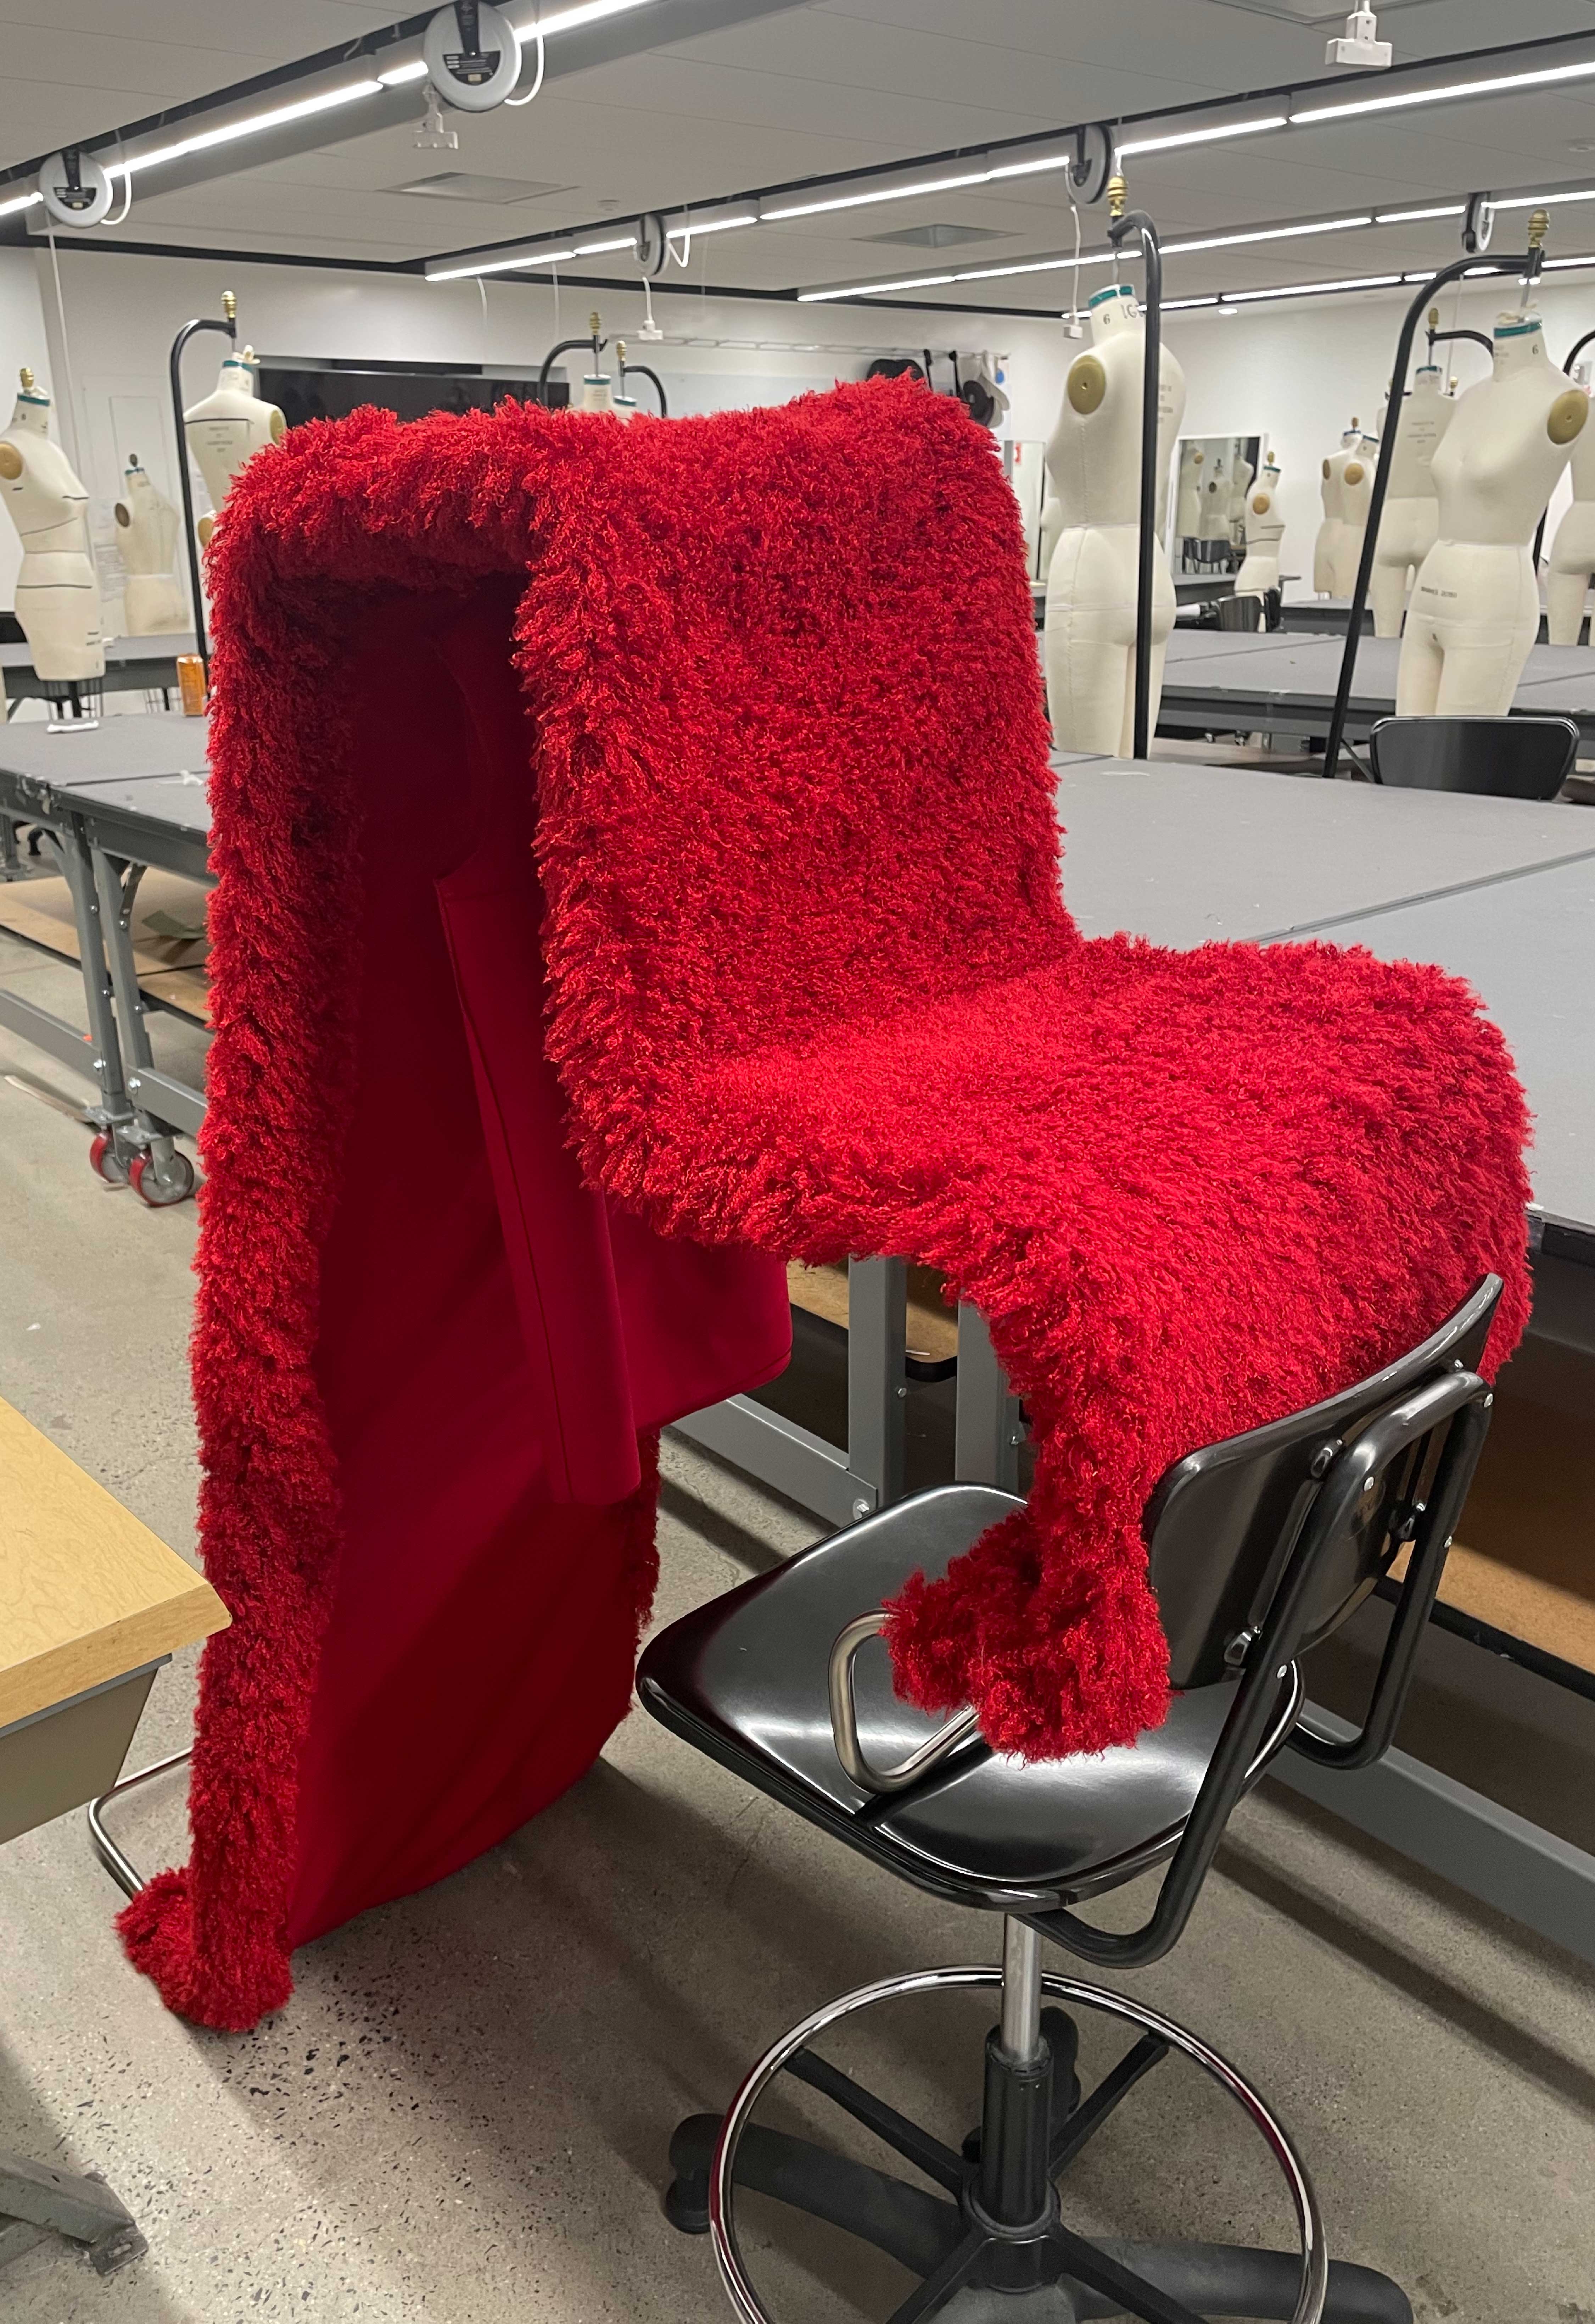 A Work in Progress, the chair dress is leaning on a chair. It's the first prototype of the red chair dress of Image 1.